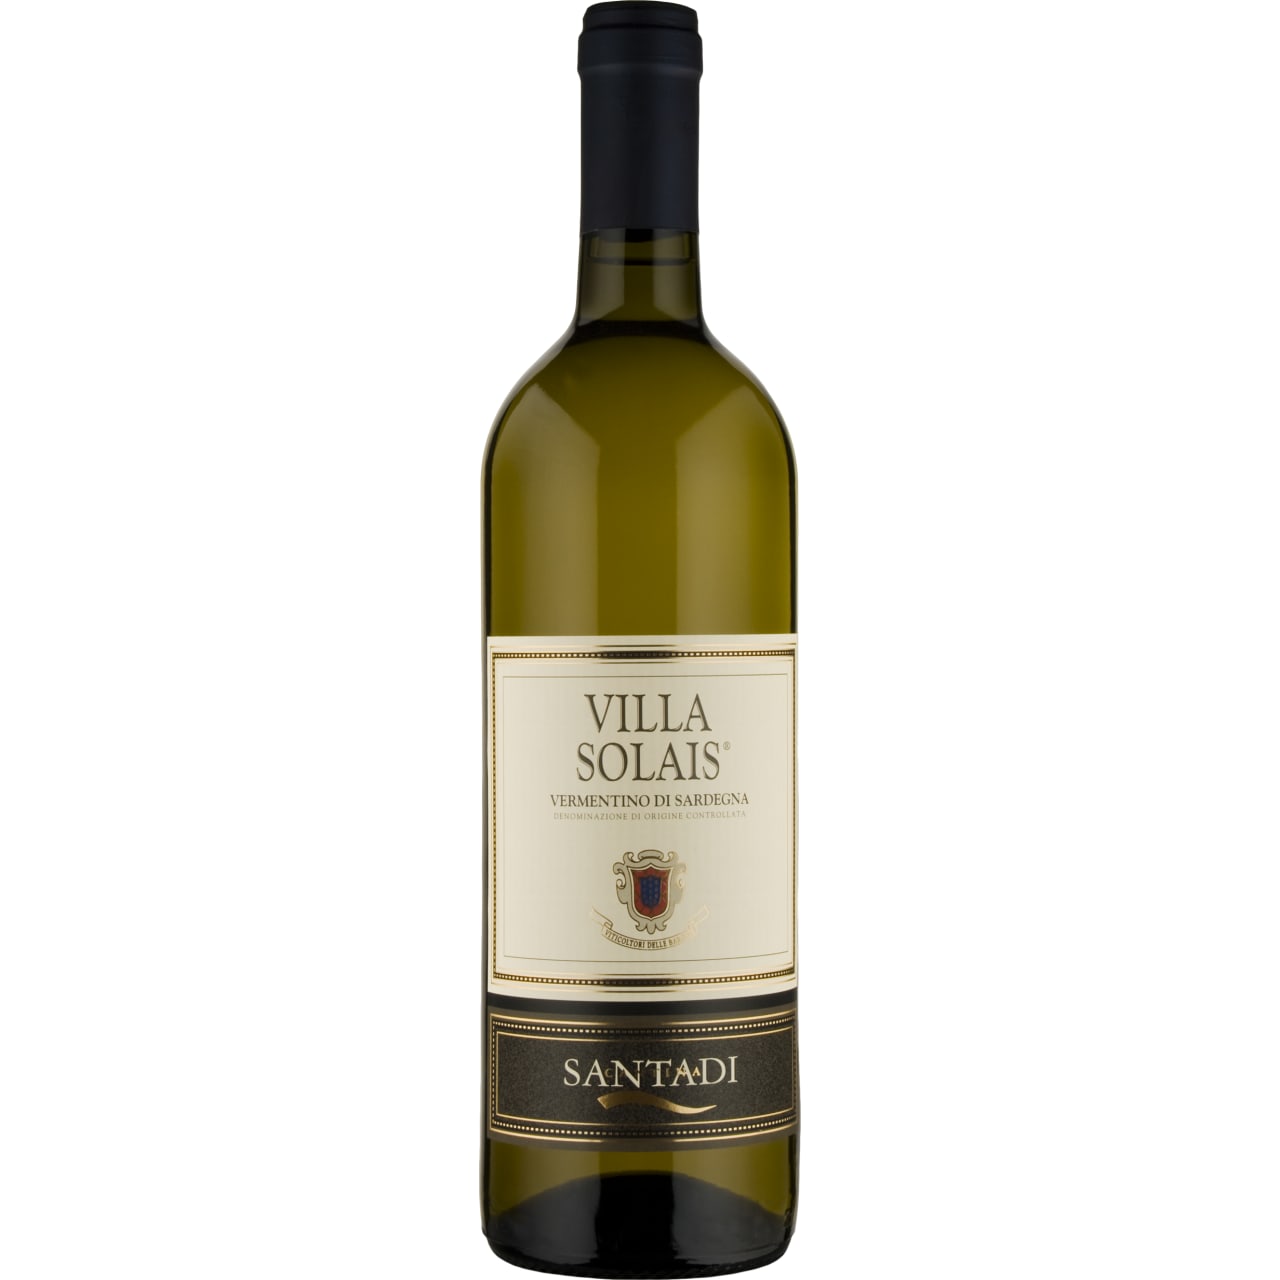 Sardinia's best known white, this golden coloured, dry wine is herbal and aromatic, displaying light almond flavours and a fresh well balanced finish.